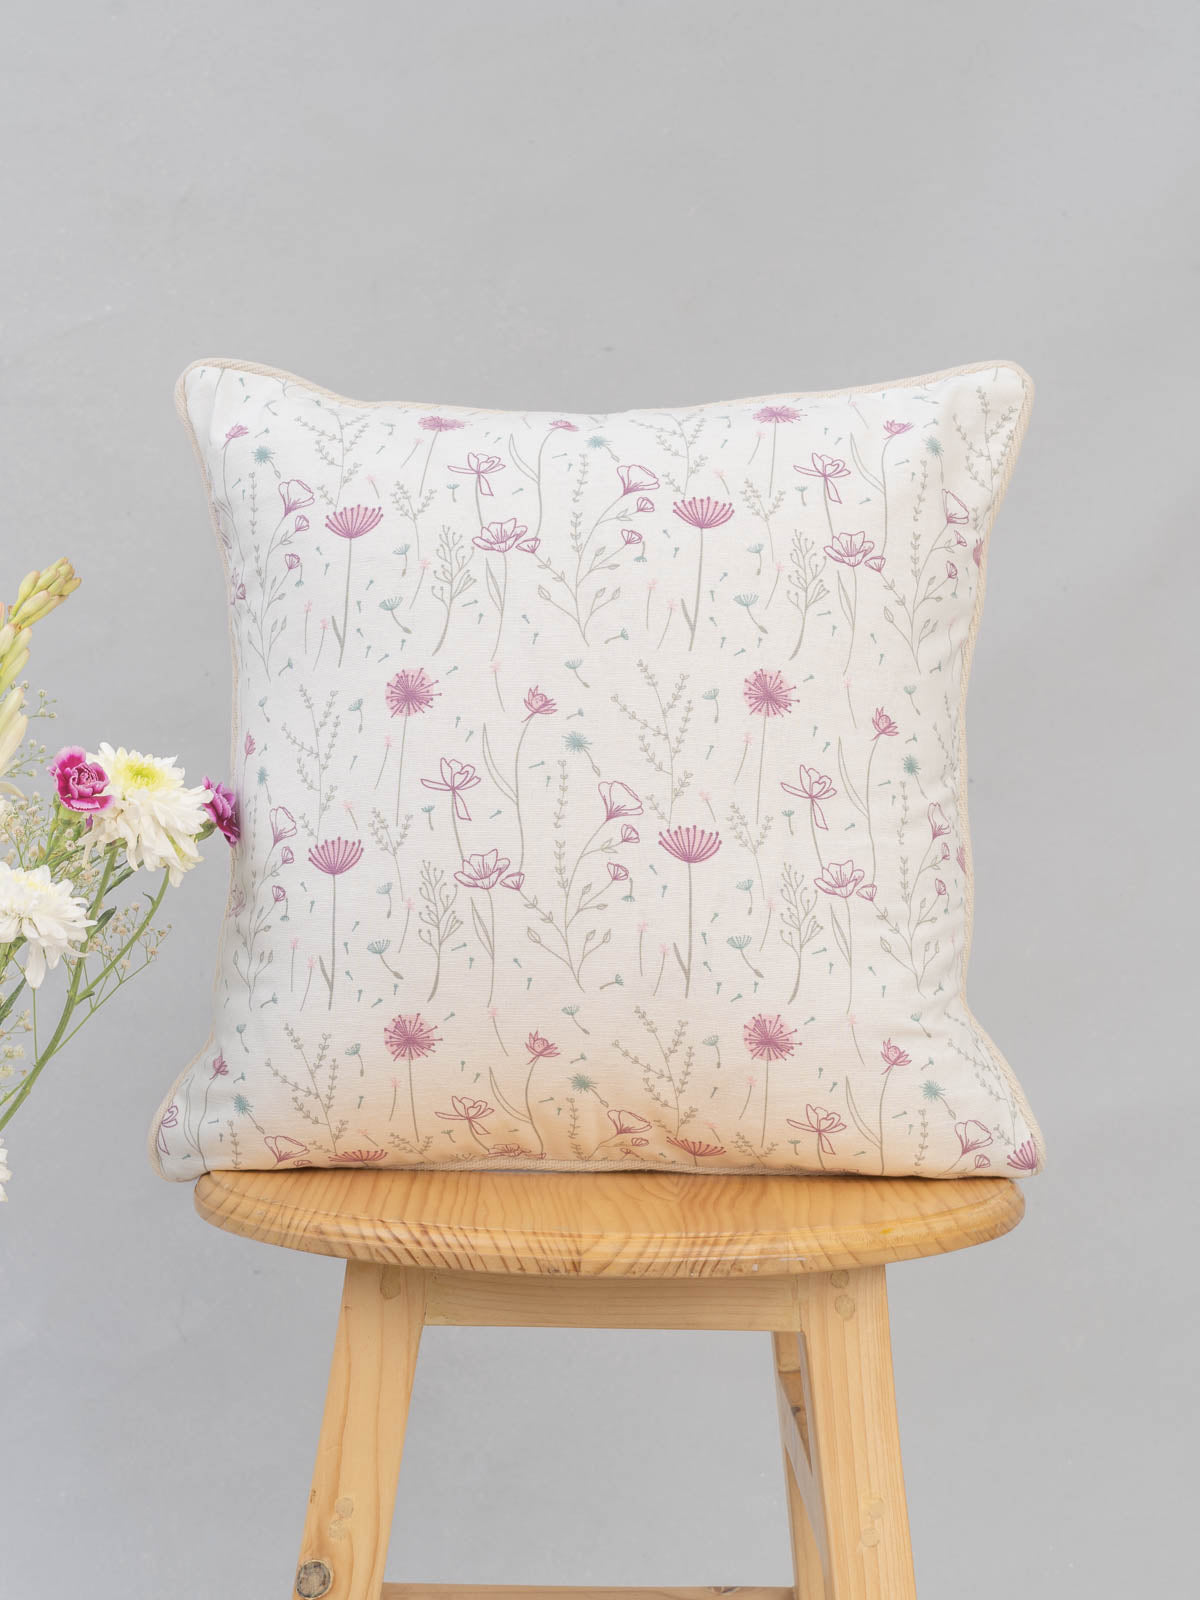 Drifting dandelion 100% cotton customizable floral cushion cover for sofa - Pink